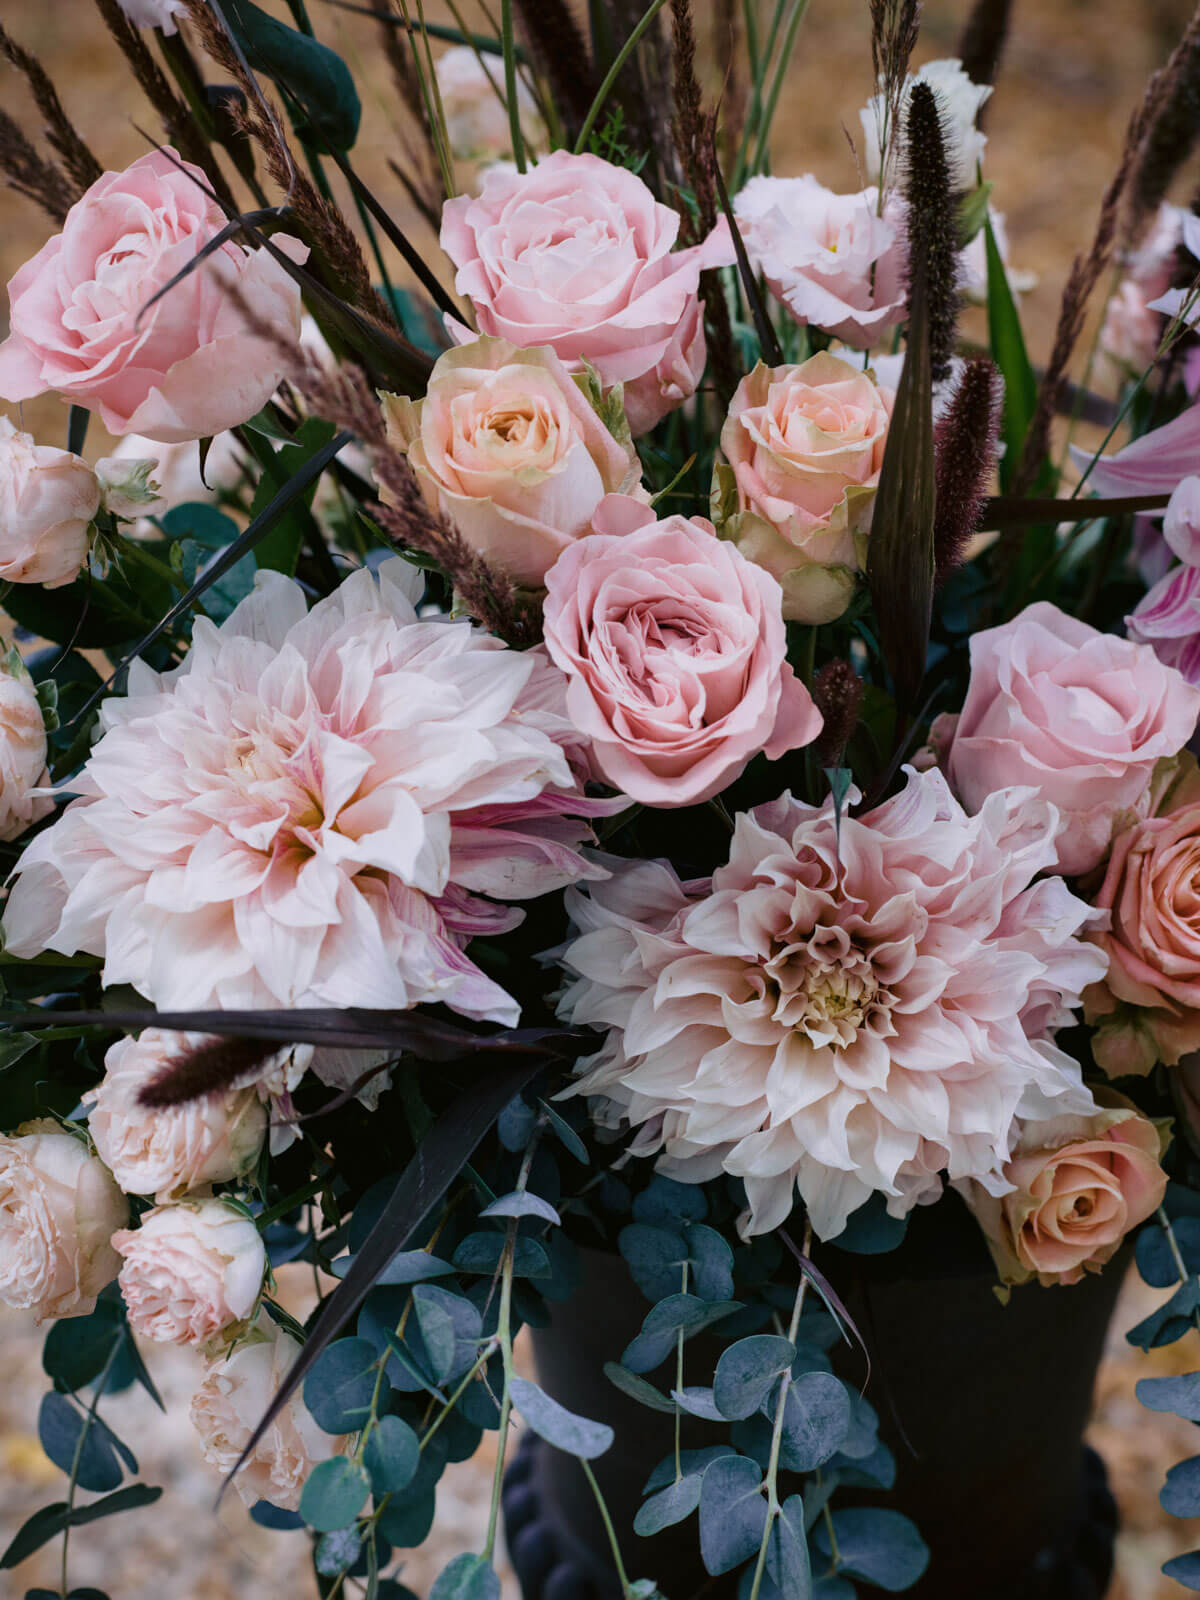 A mix of baby pink, pale orange, and white flowers for a France wedding. Image by Destination Wedding Photographer Jenny Fu